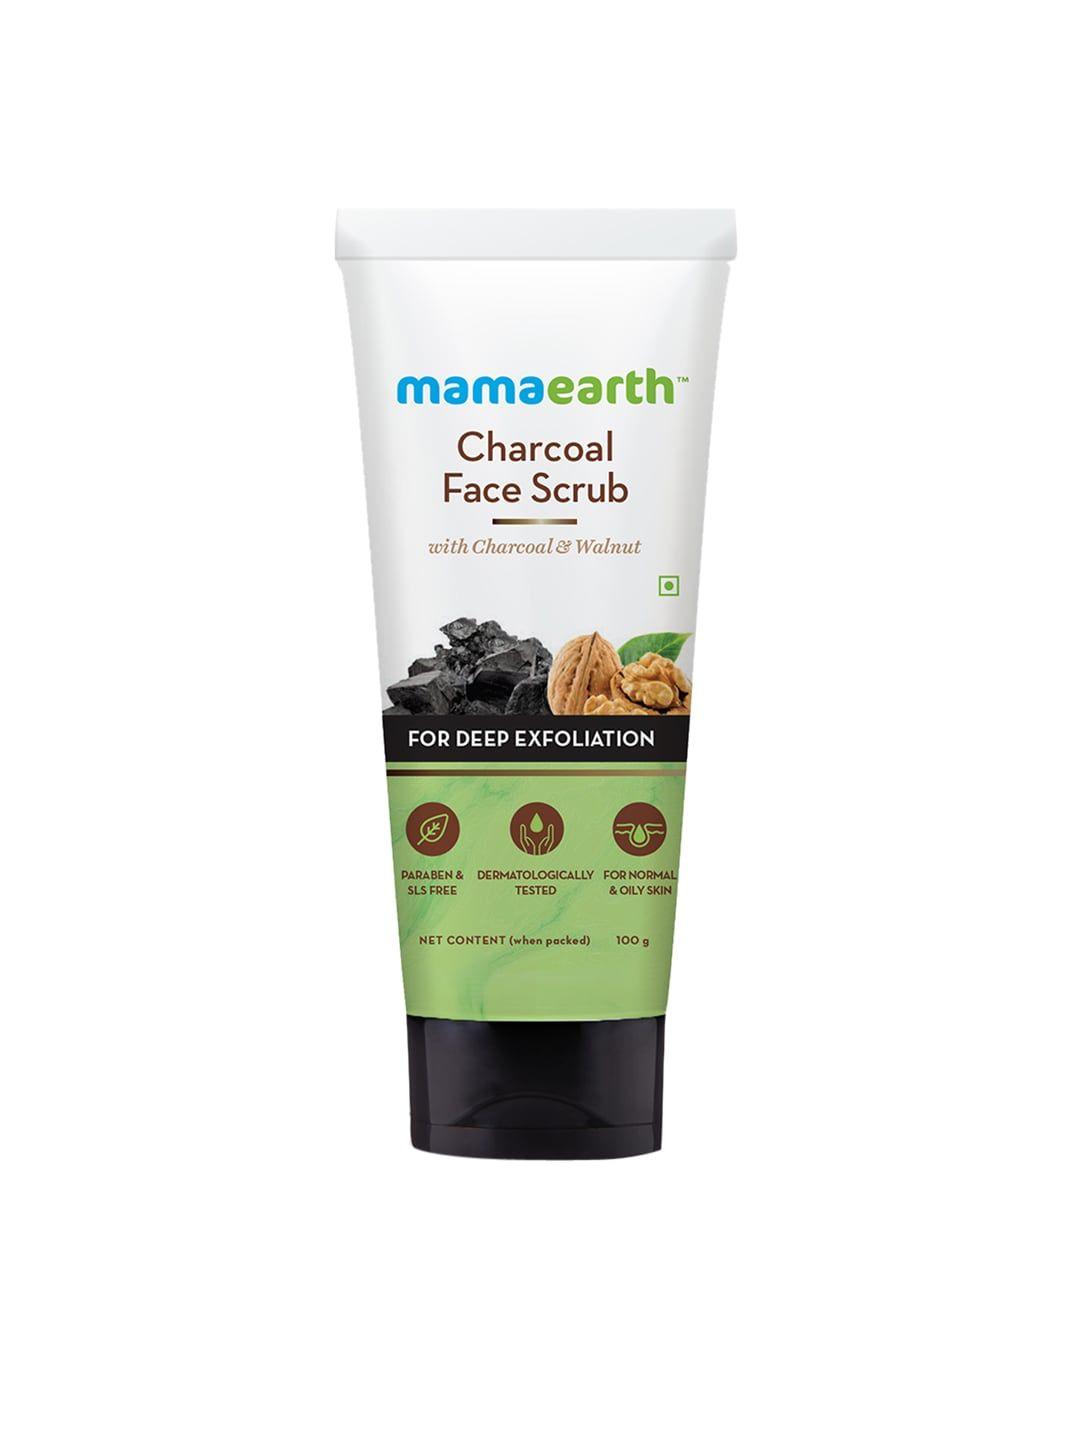 mamaearth sustainable charcoal face scrub with walnut for oily & normal skin 100 g